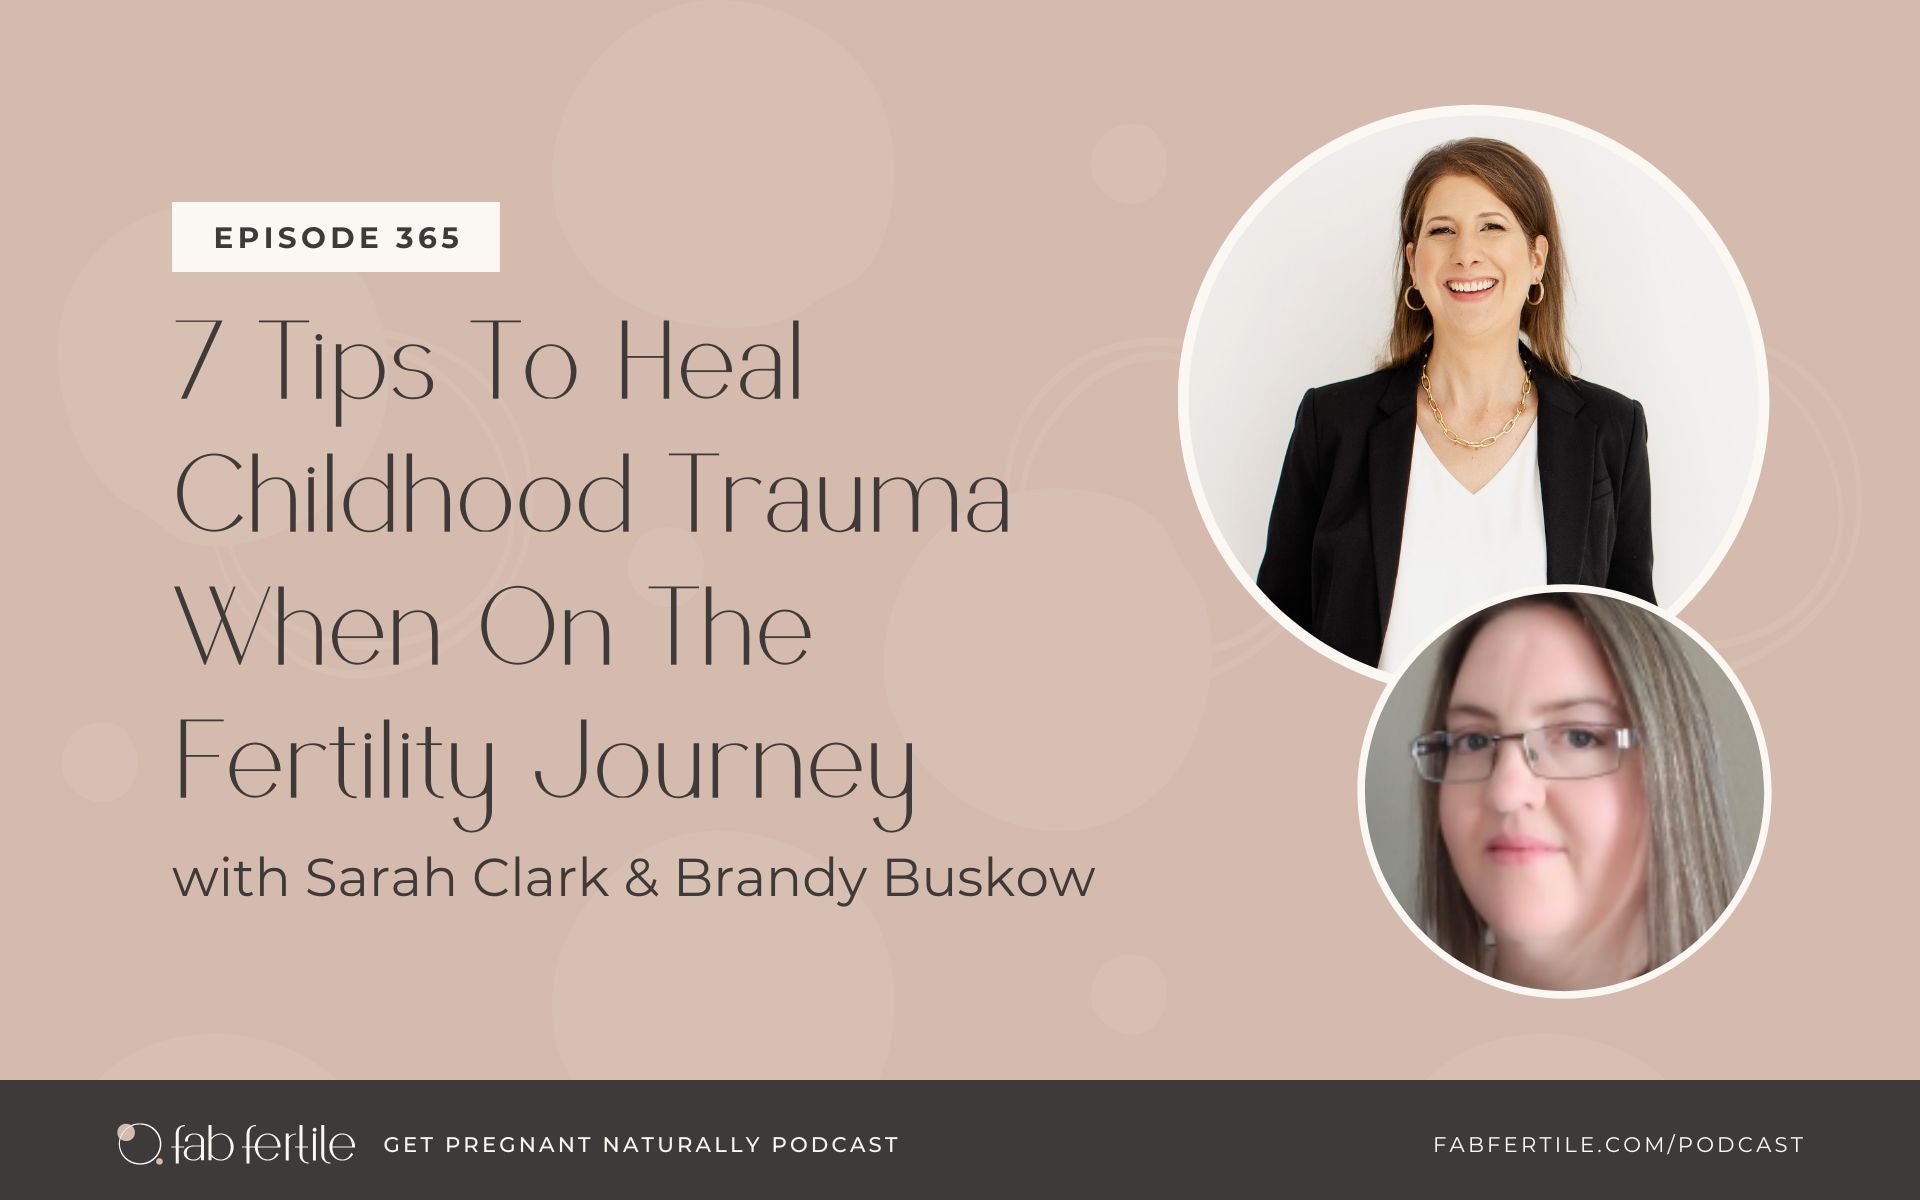 7 Tips To Heal Childhood Trauma When On The Fertility Journey